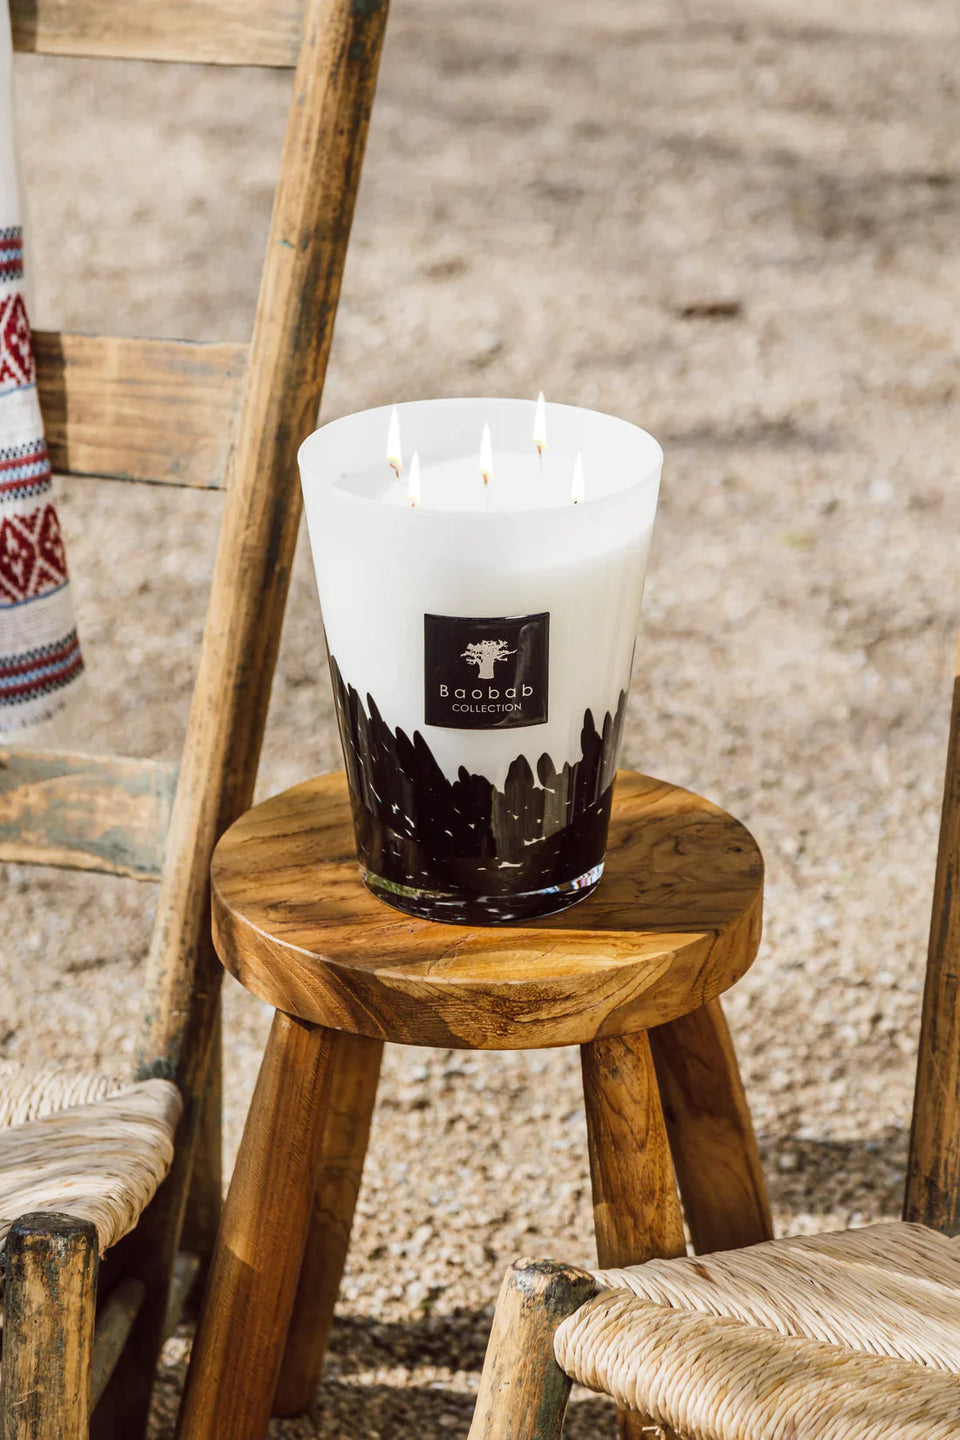 Baobab Collection "Feathers" candle